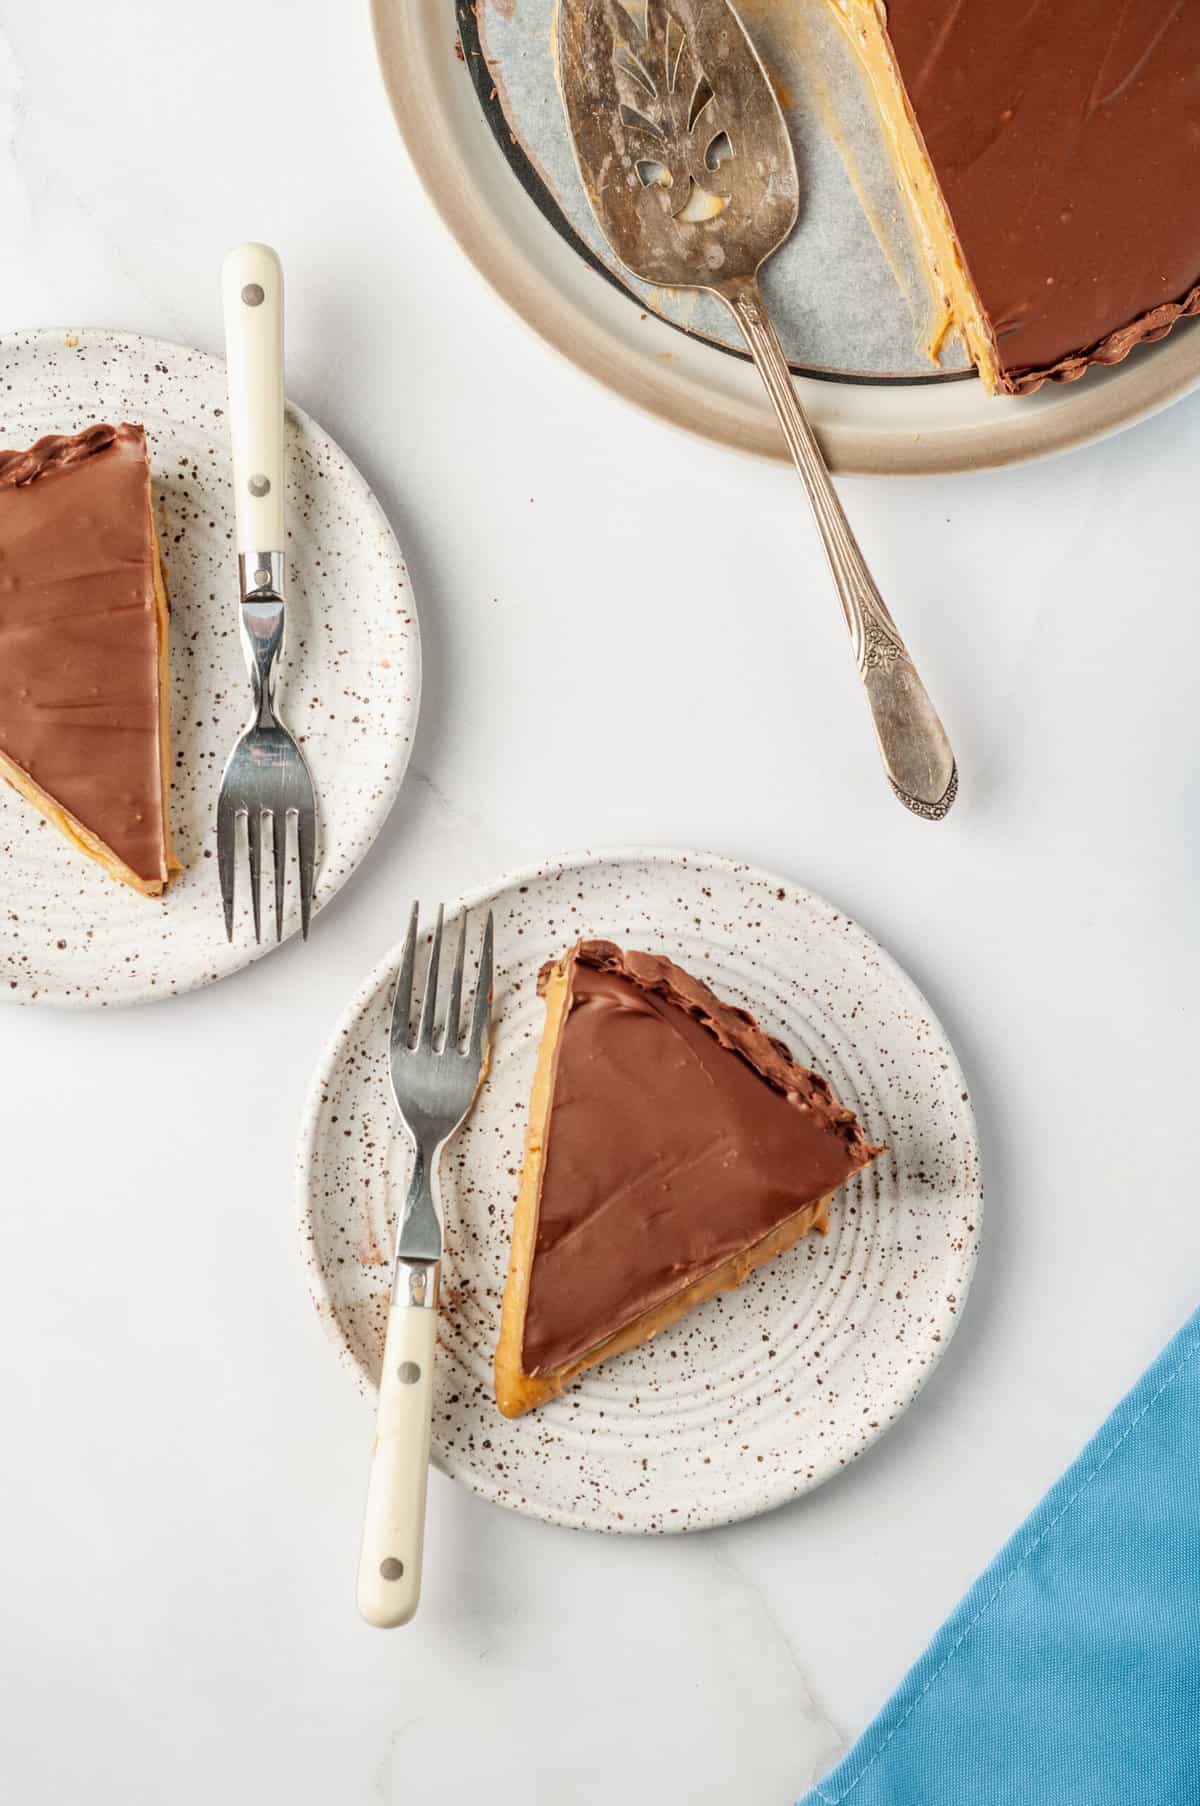 A top down image of servings of peanut butter cup pies served on speckled brown plate with a fork.